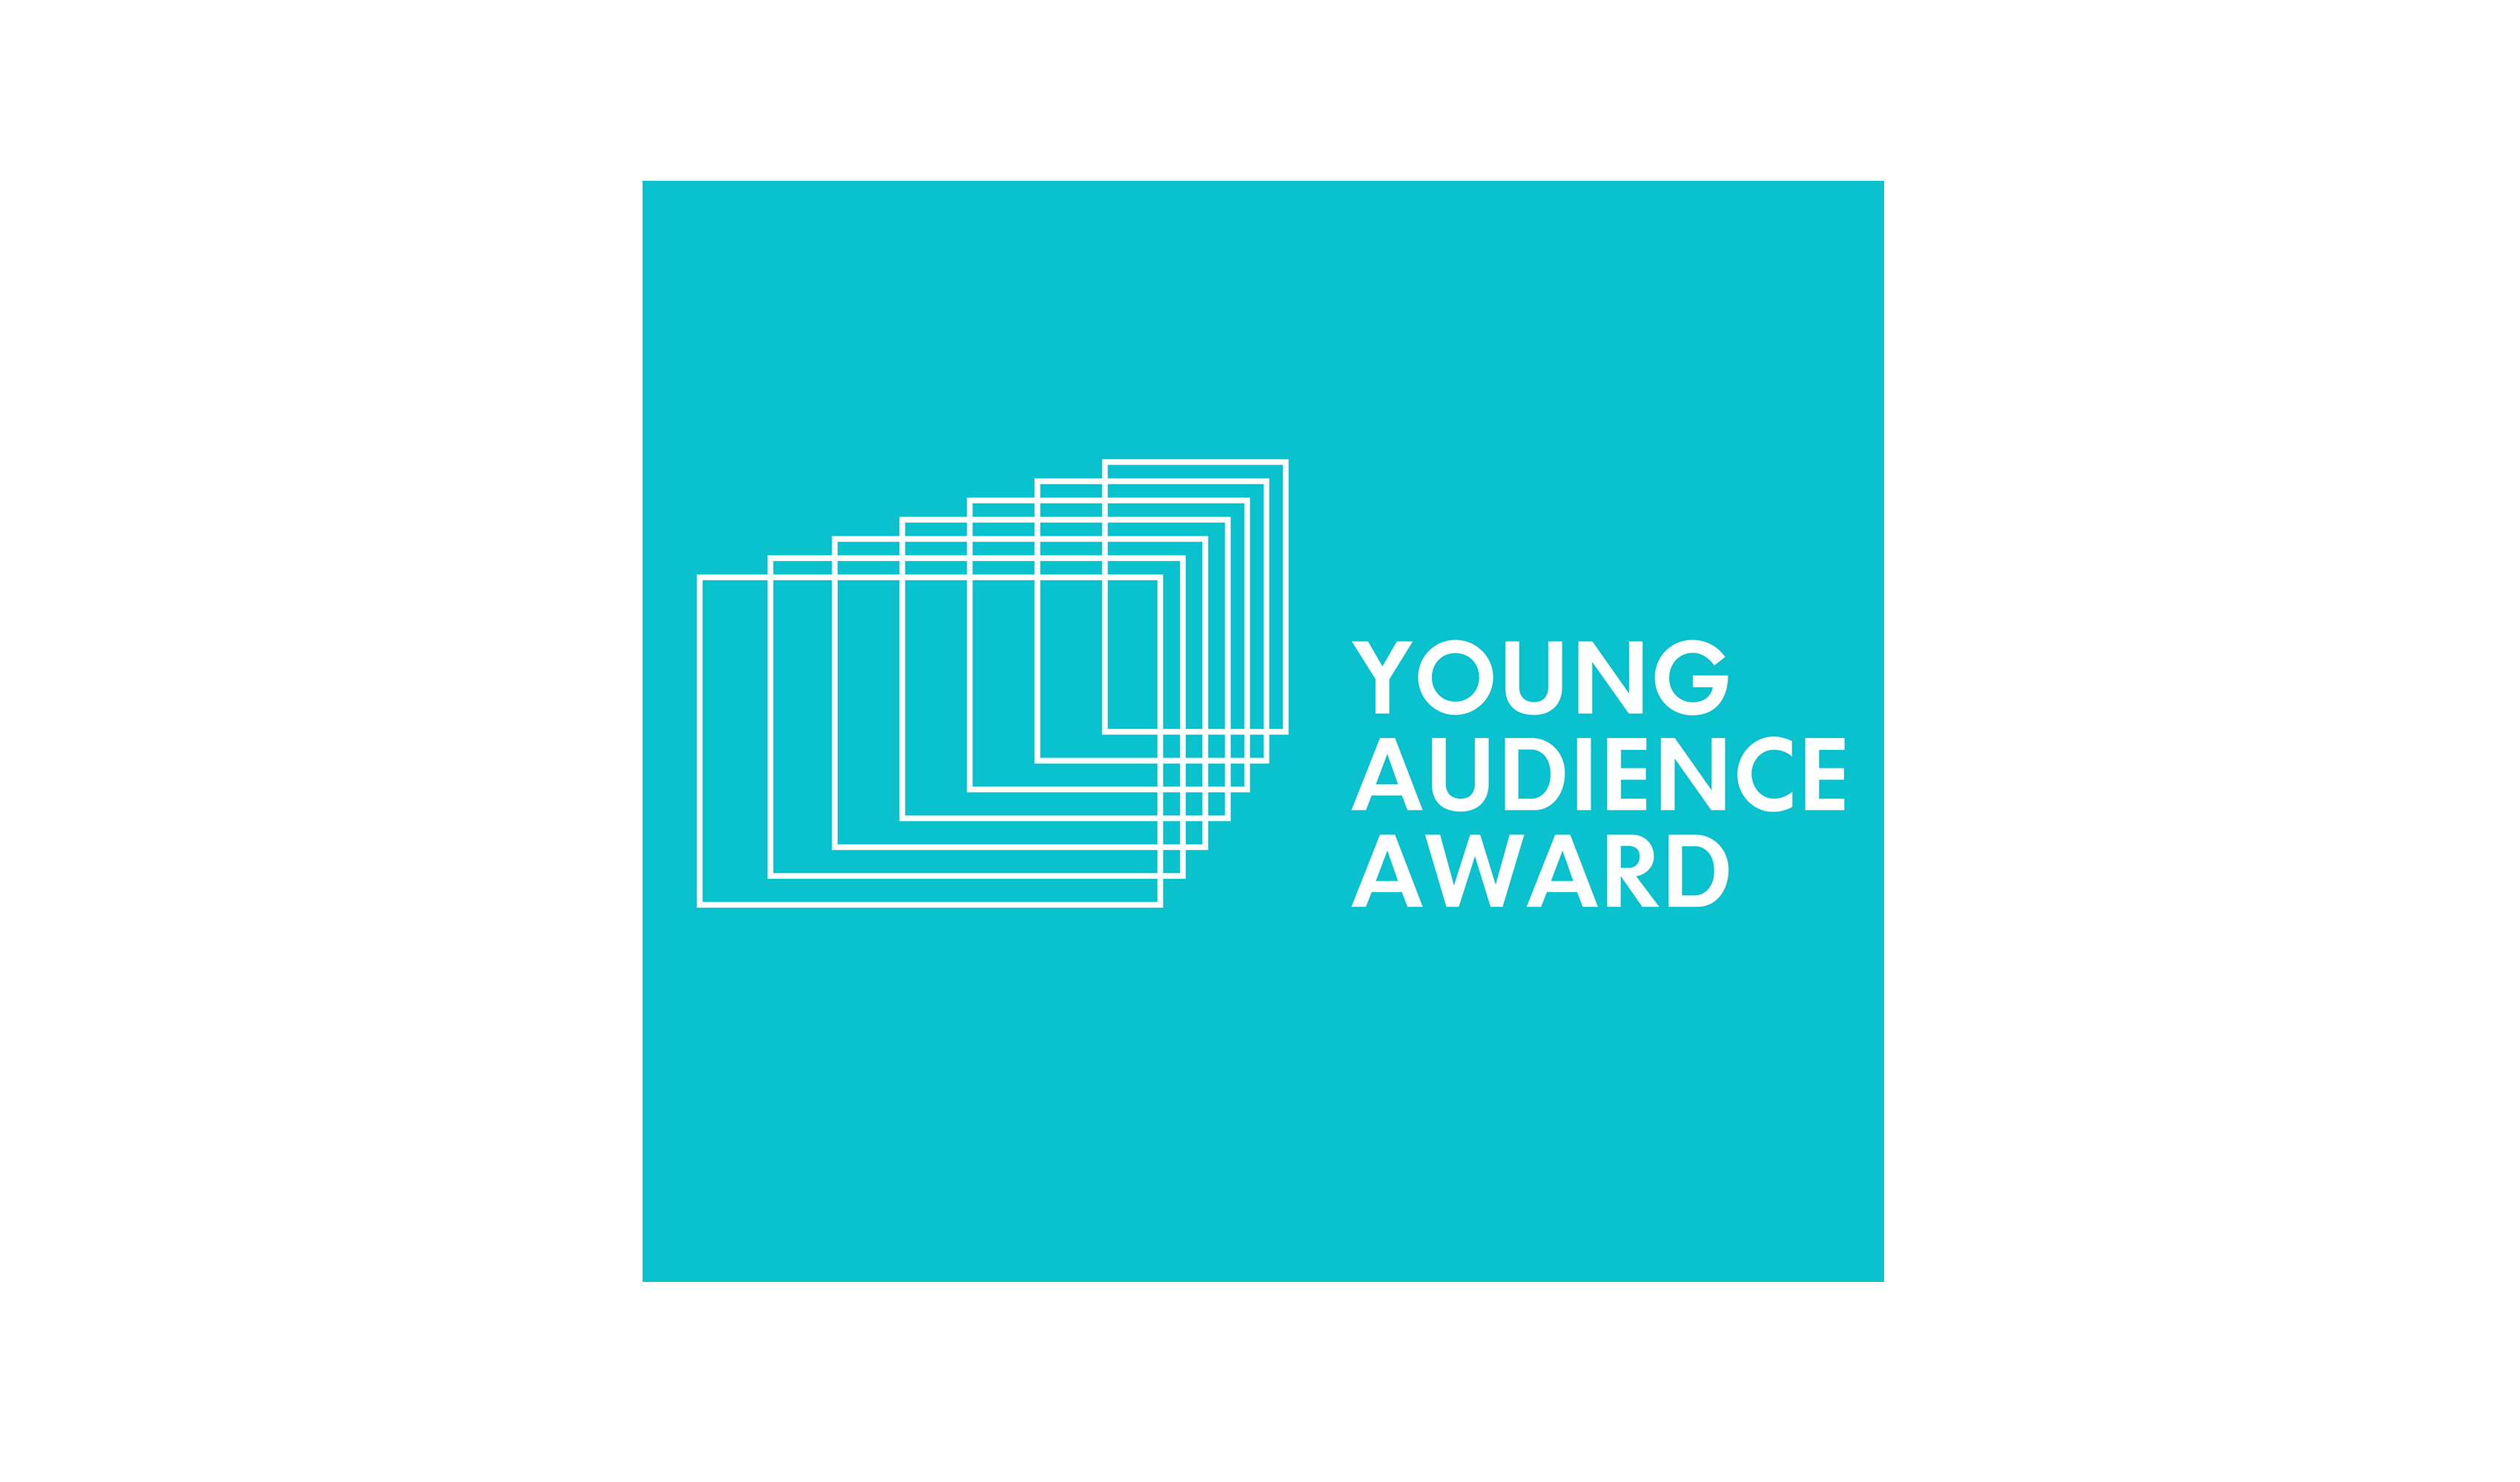 YOUNG AUDIENCE AWARD